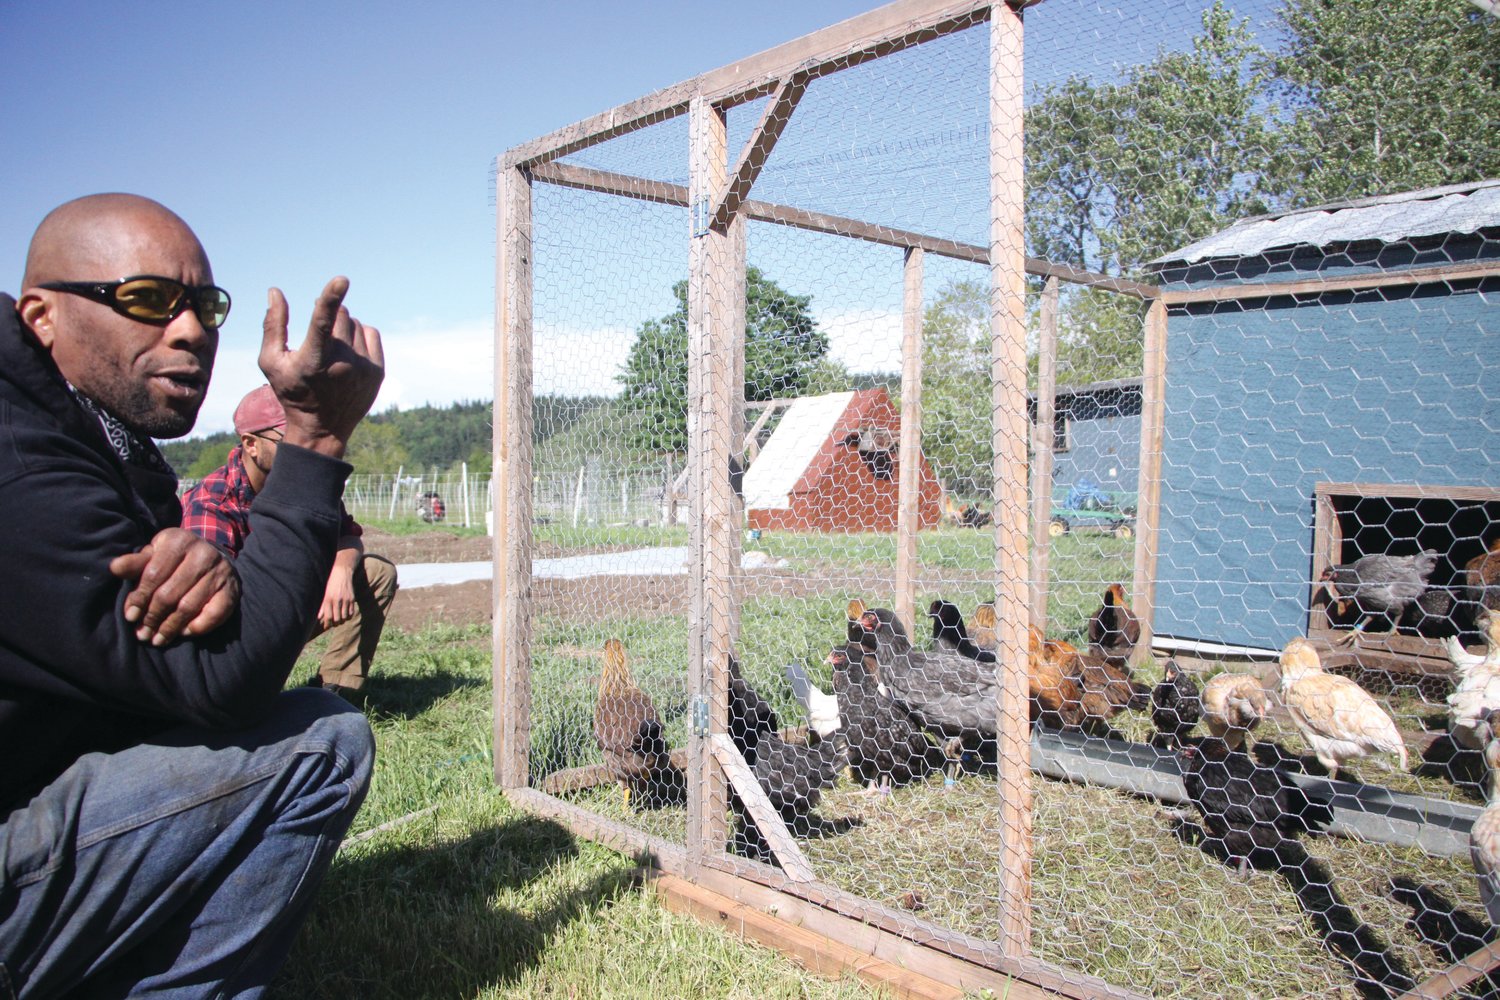 Peter Mustin discusses the wide variety of poultry raised at the property.